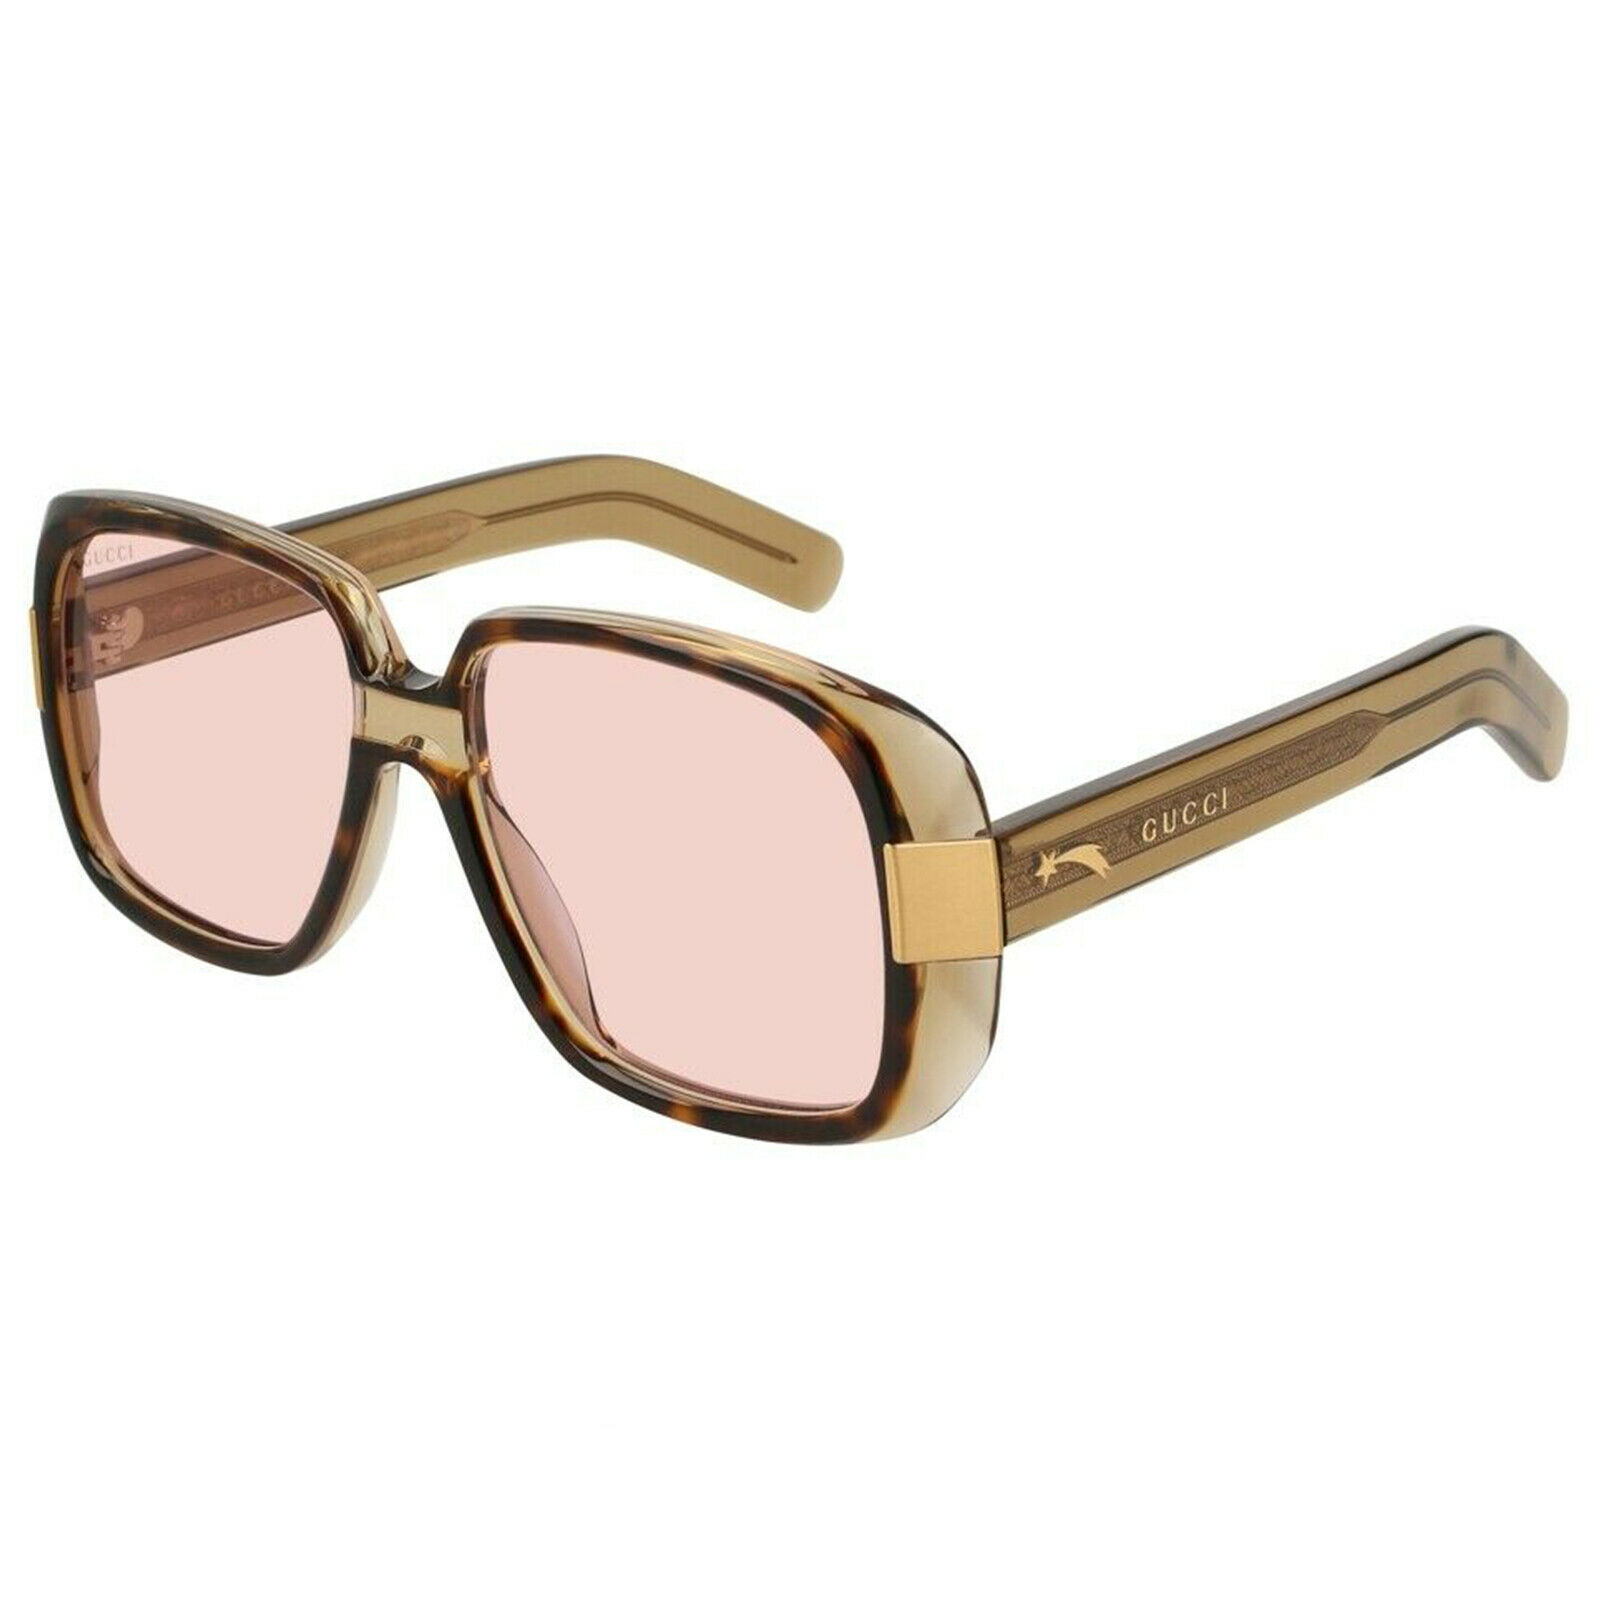 Gucci GG0200s 005 Clear & Gold Unisex Sunglasses - See My Glasses